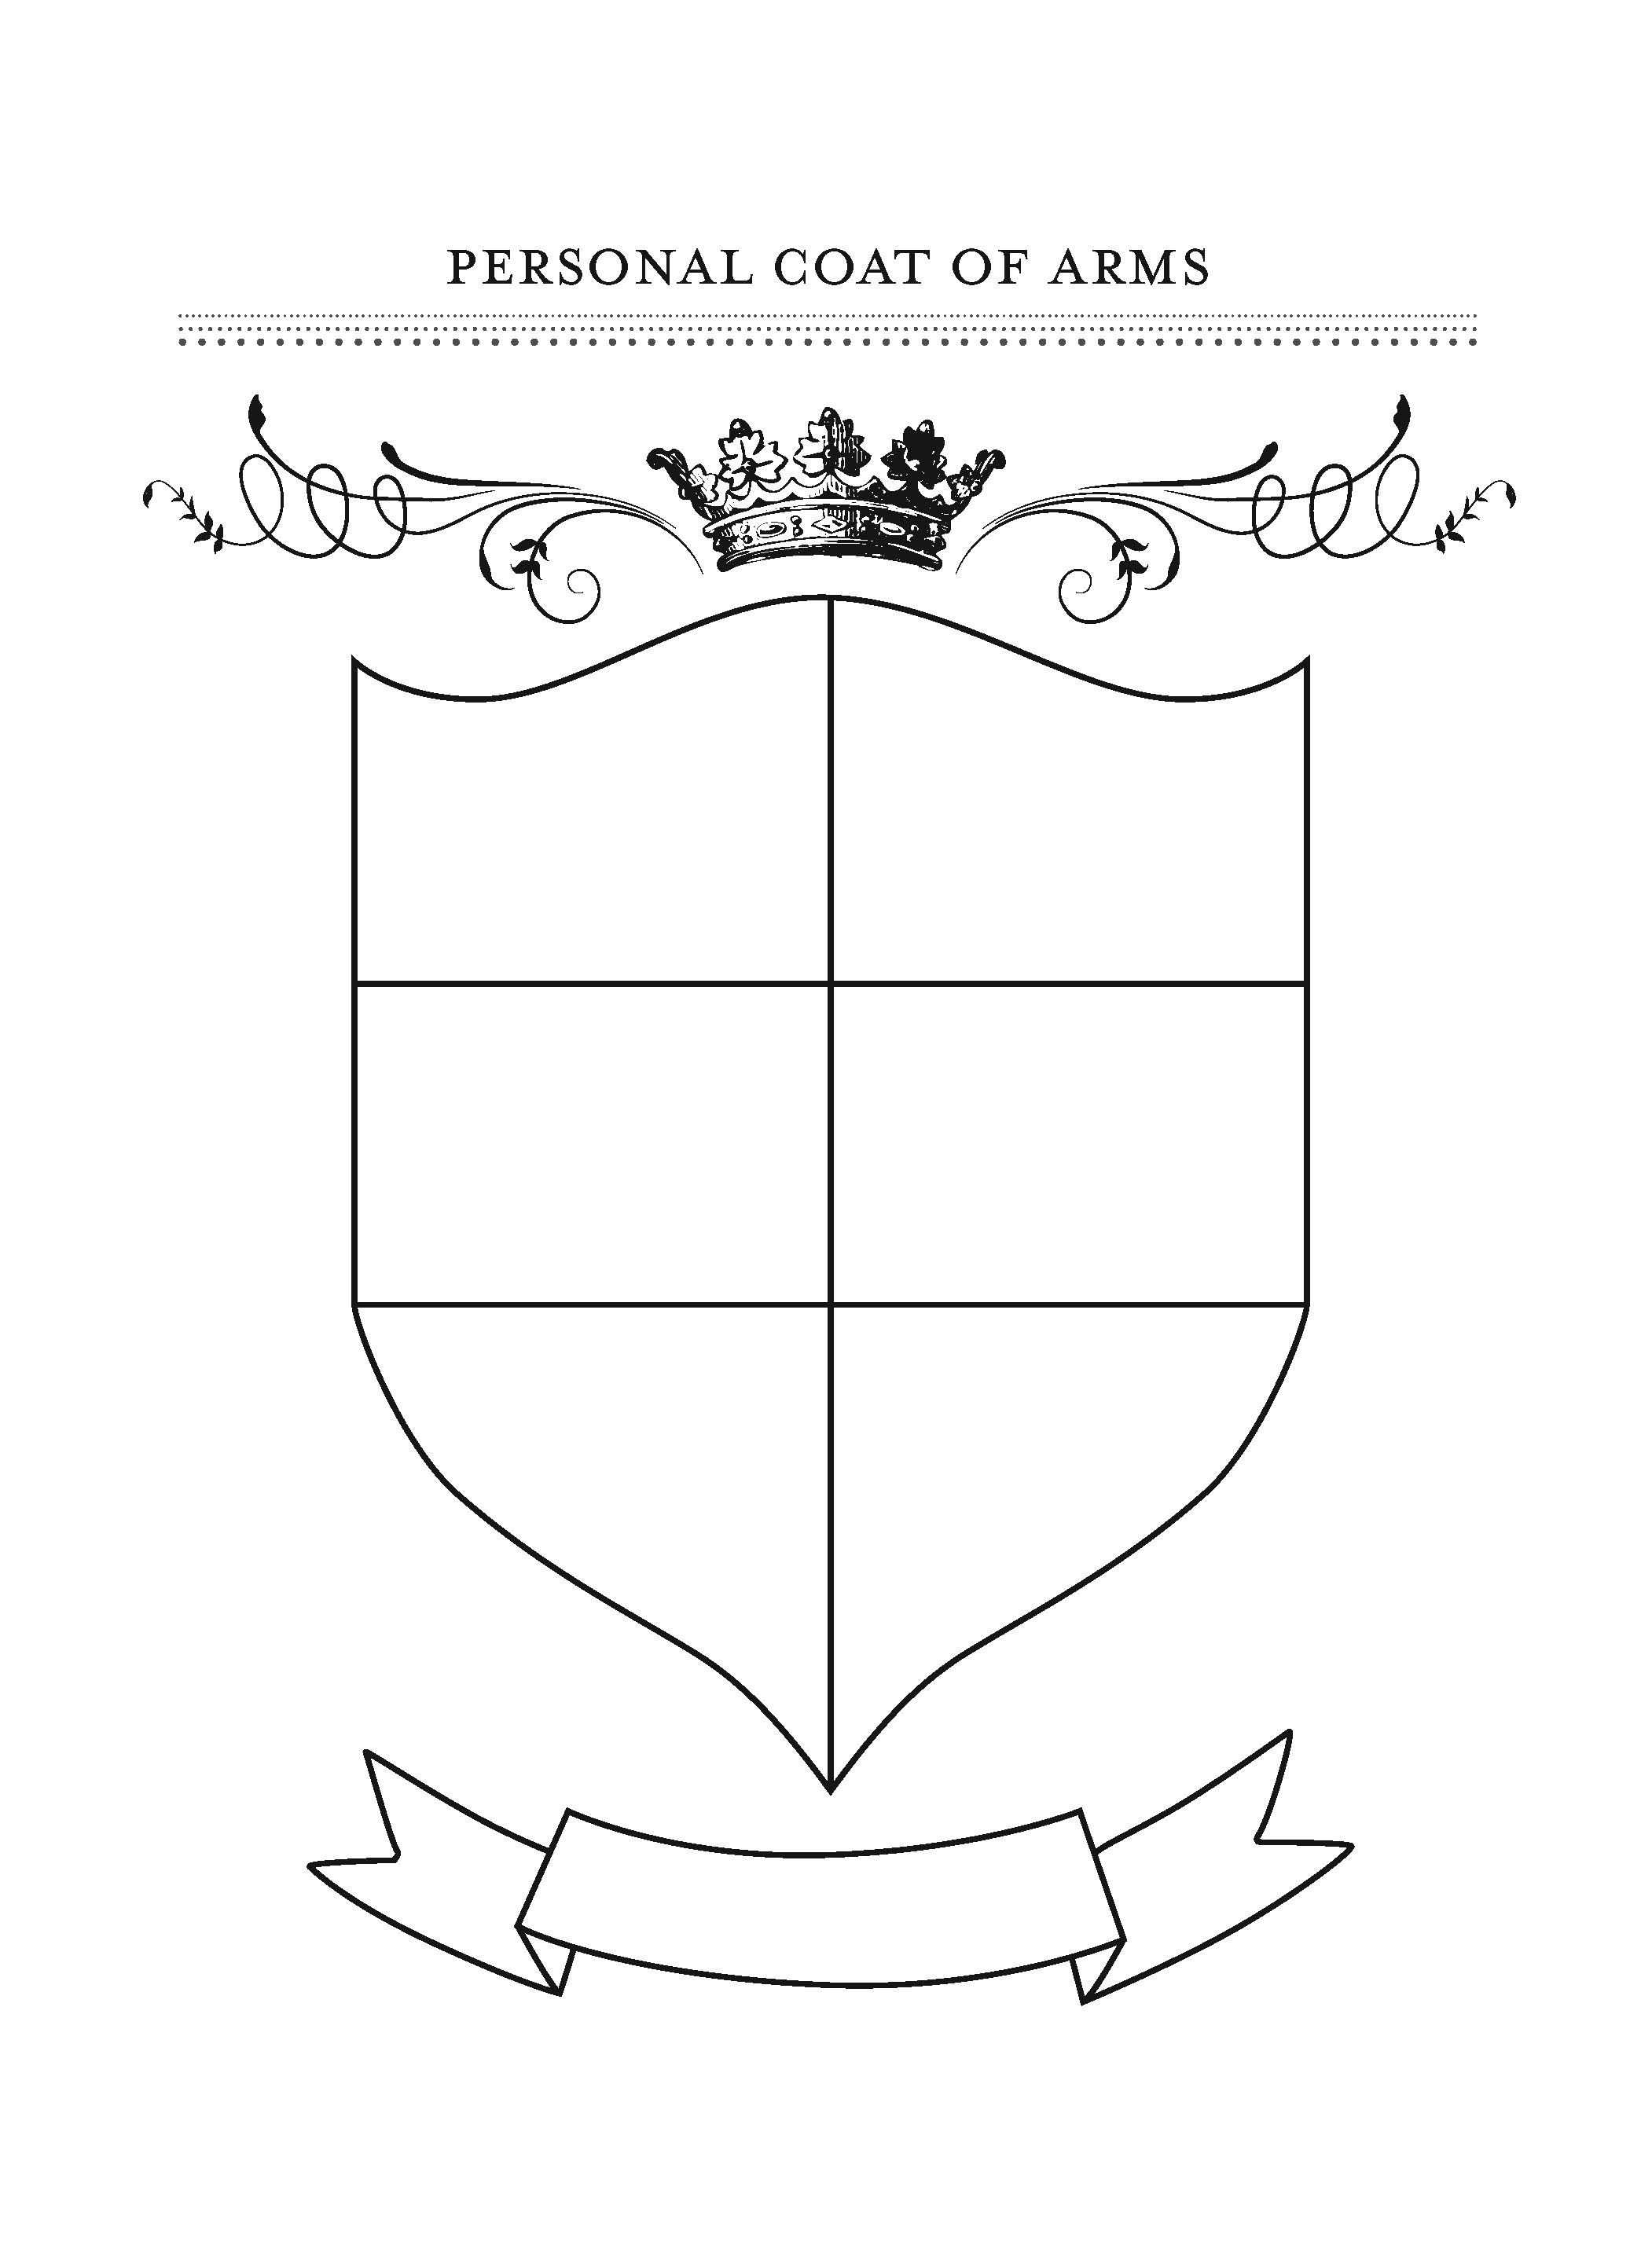 Honor Your Family With Fun Gratitude Crafts | Coat Of Arms Regarding Blank Shield Template Printable